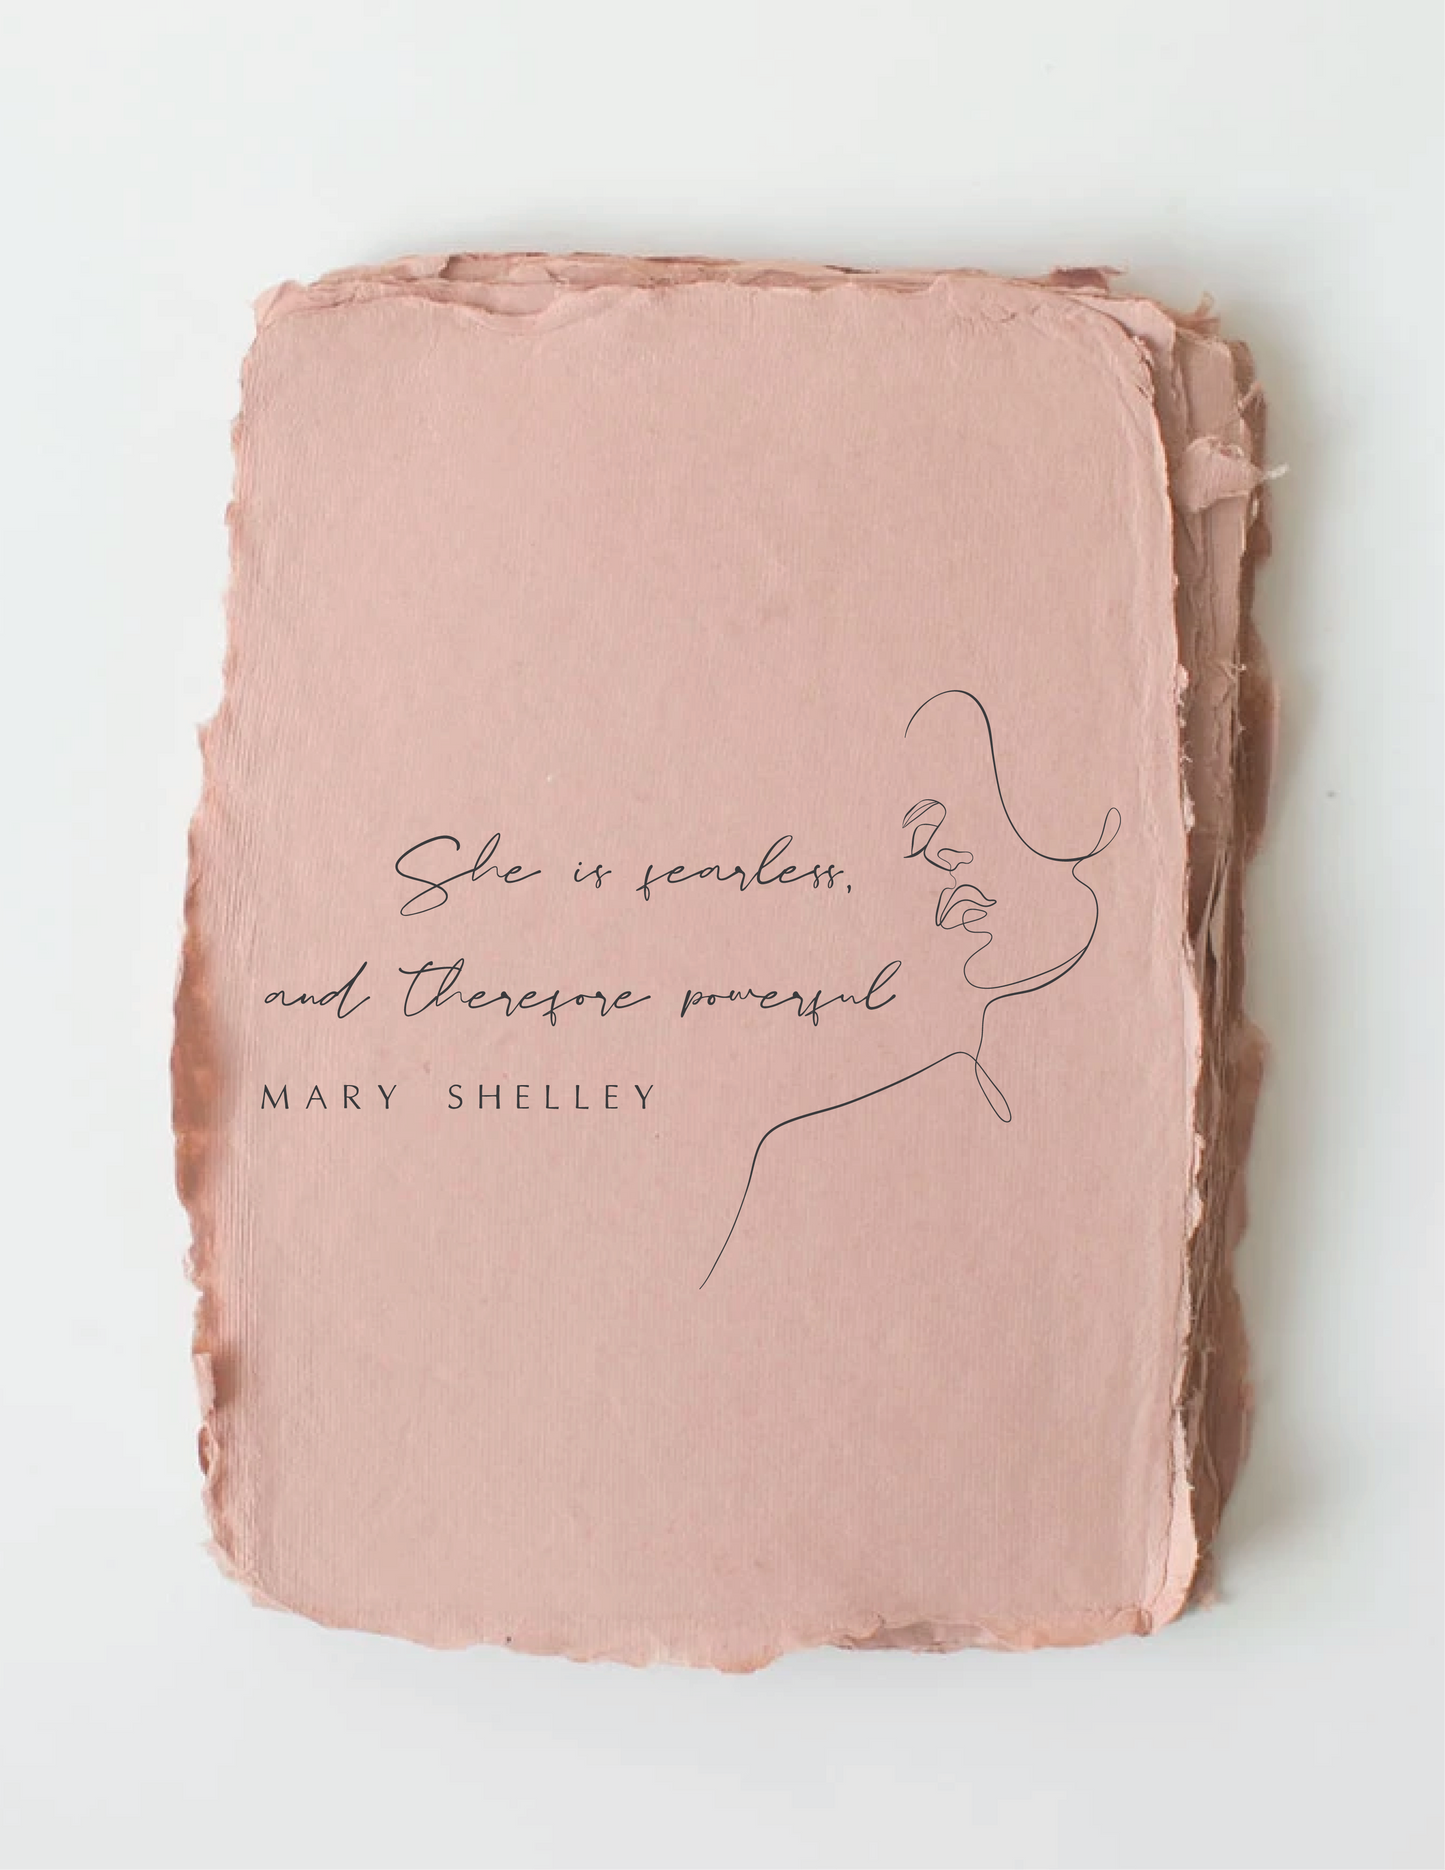 Paper Baristas - "She is fearless and powerful" Empowerment Greeting Card